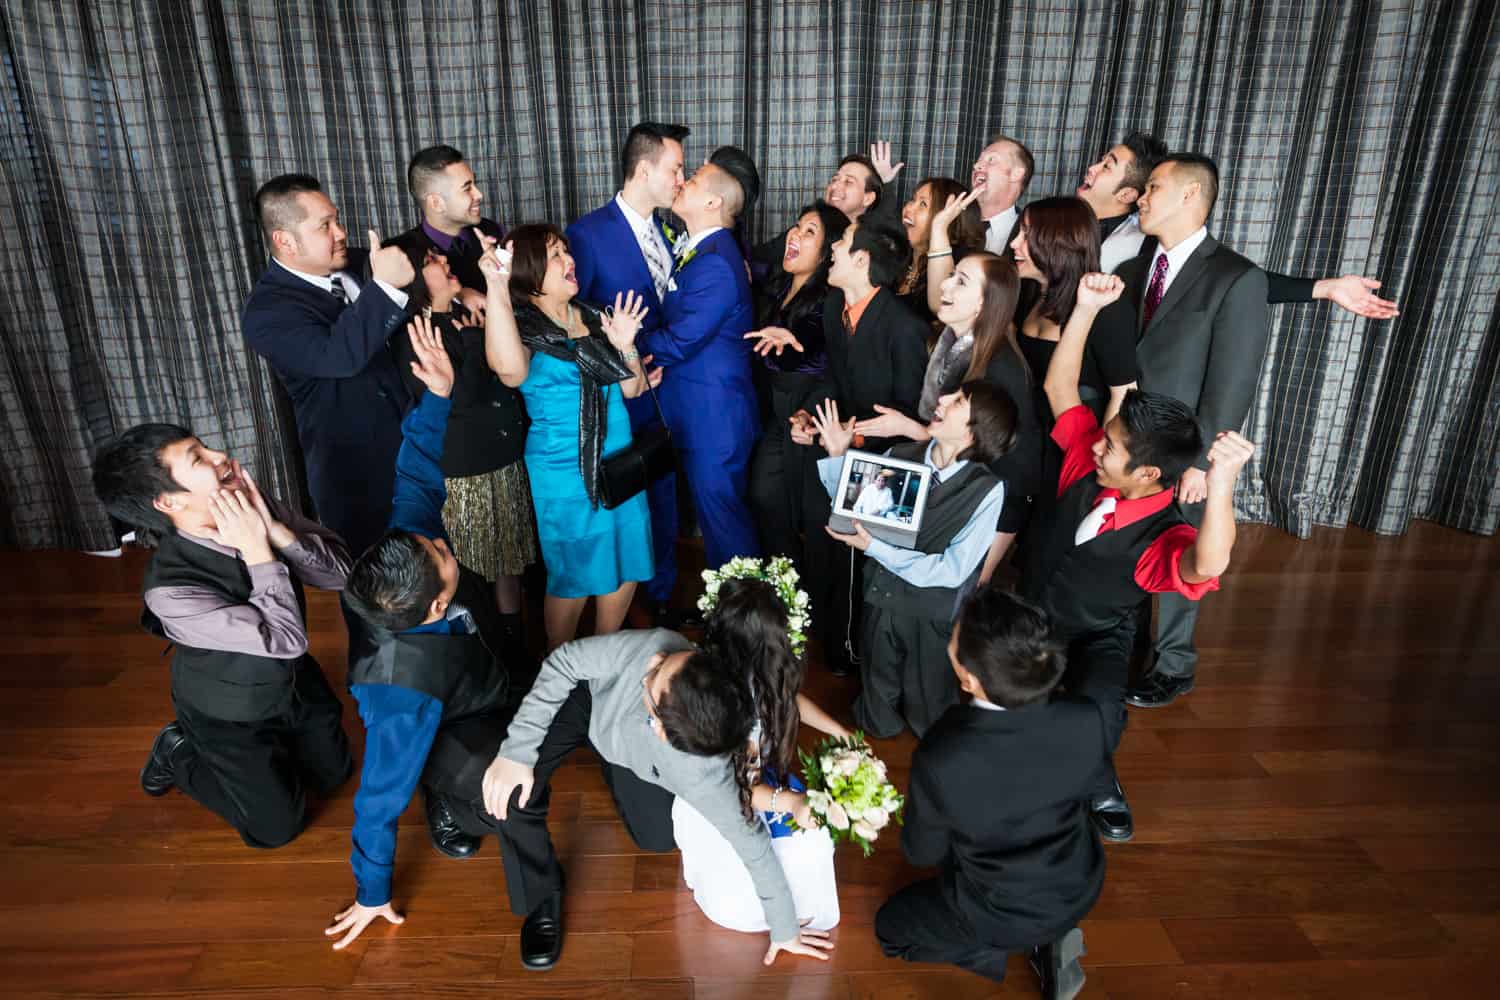 Family cheering around two grooms kissing